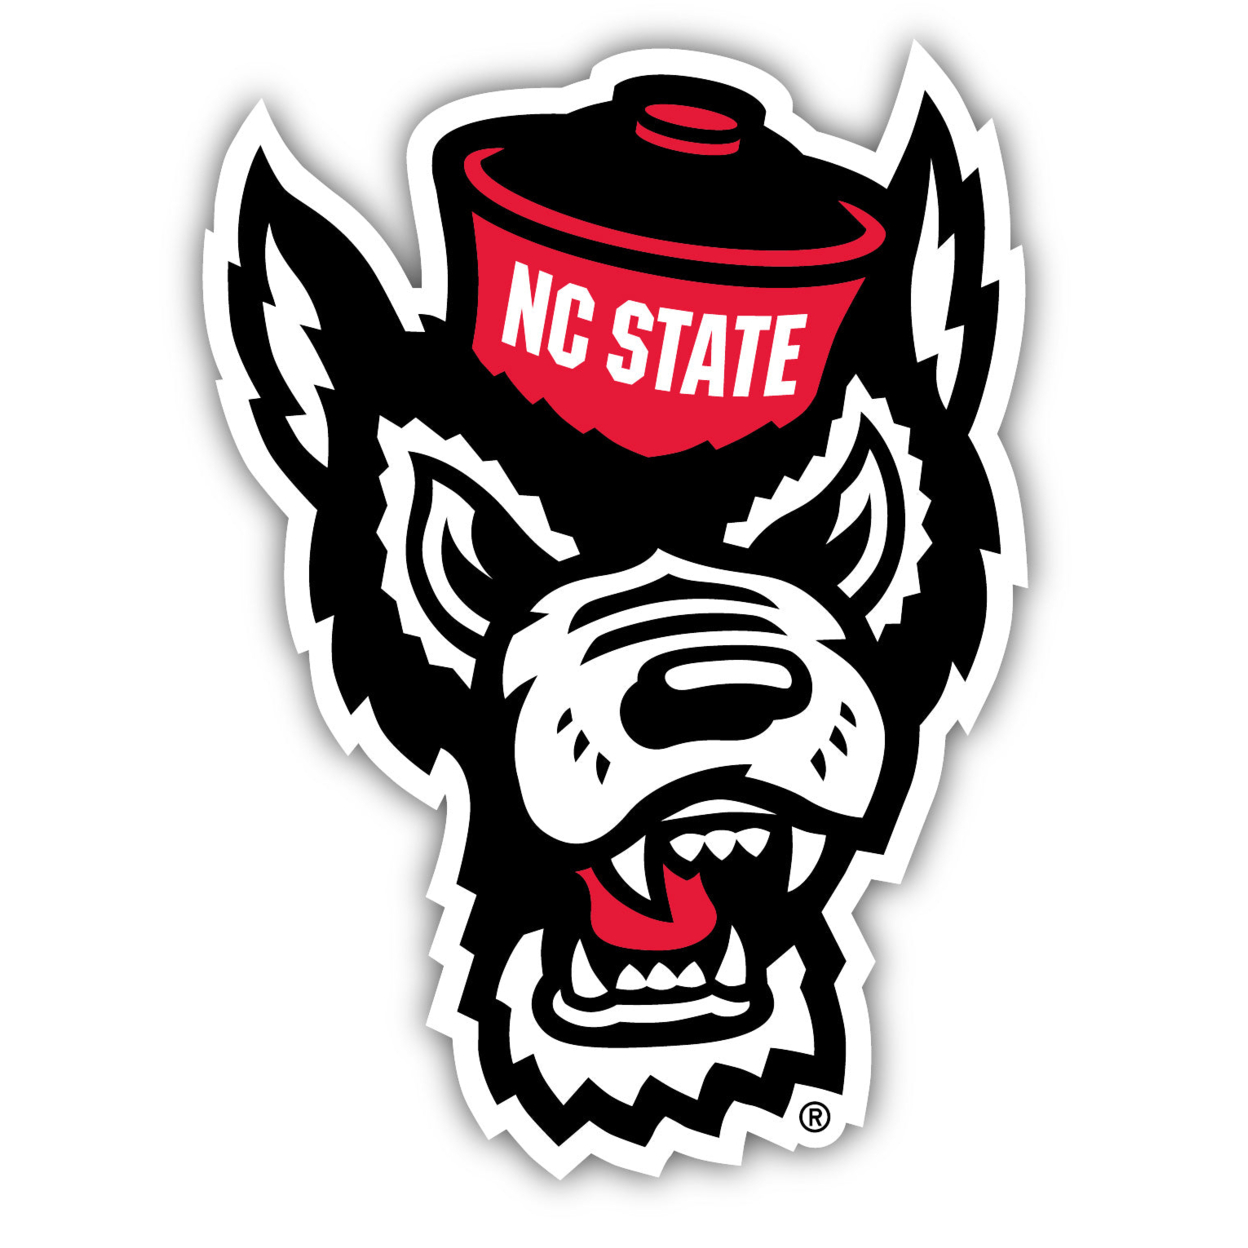 NC State Wolfpack 12 Inch Vinyl Decal Sticker